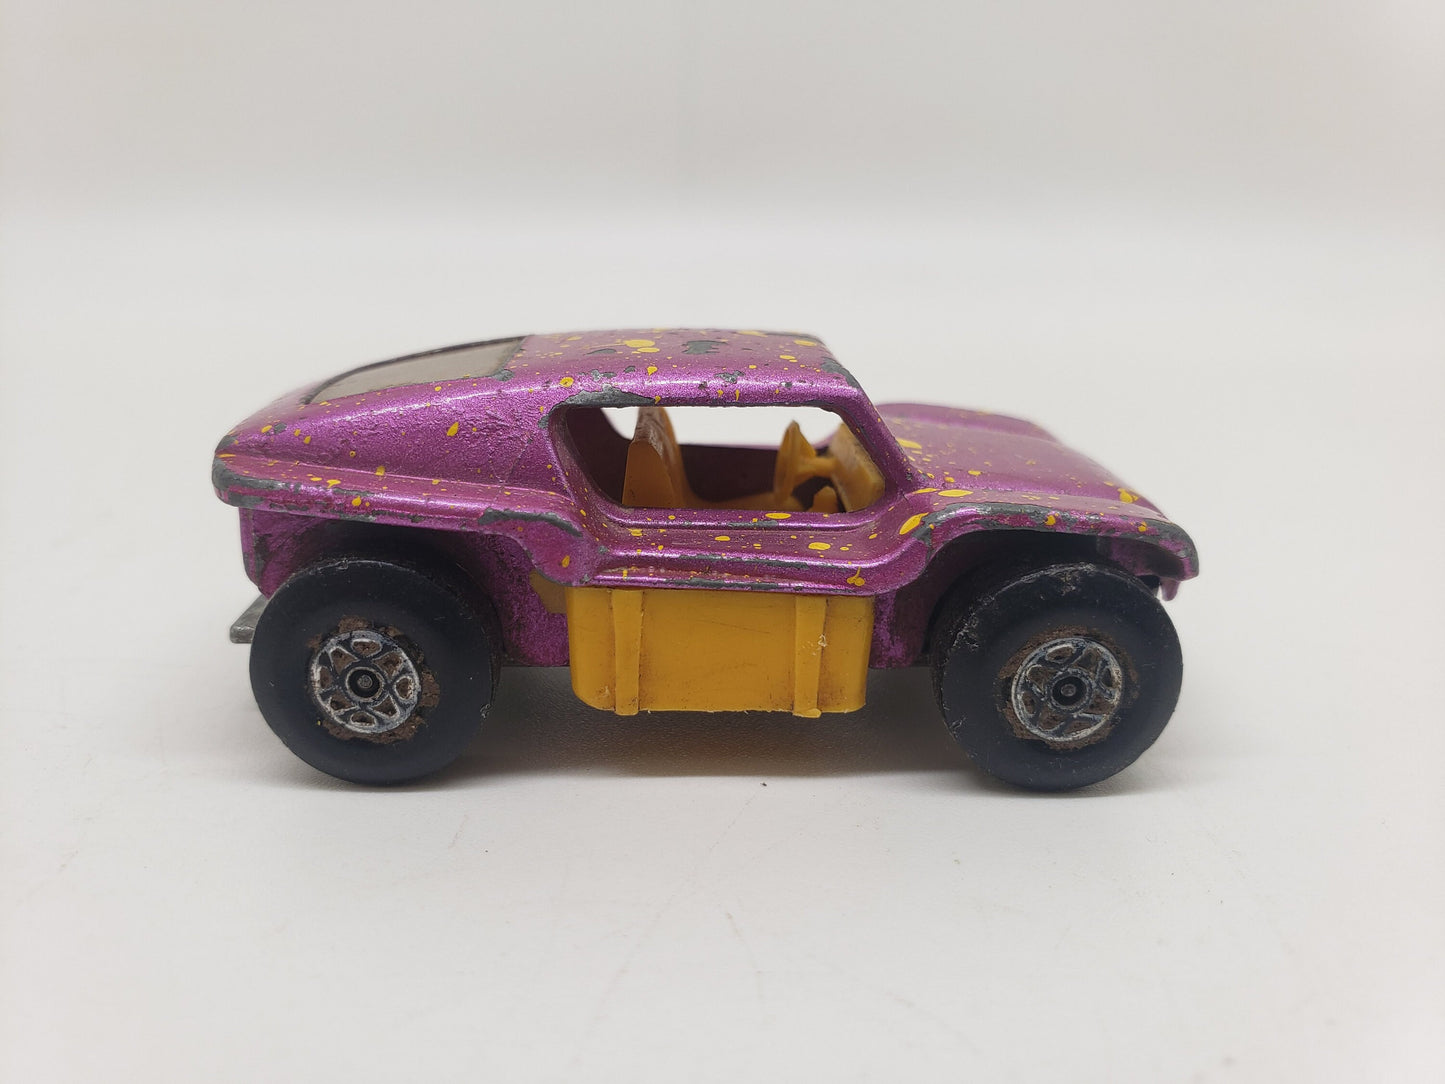 Matchbox 1971 Beach Buggy Metallic Pink Superfast Collectable Scale Model Miniature Toy Car Perfect Birthday Gift